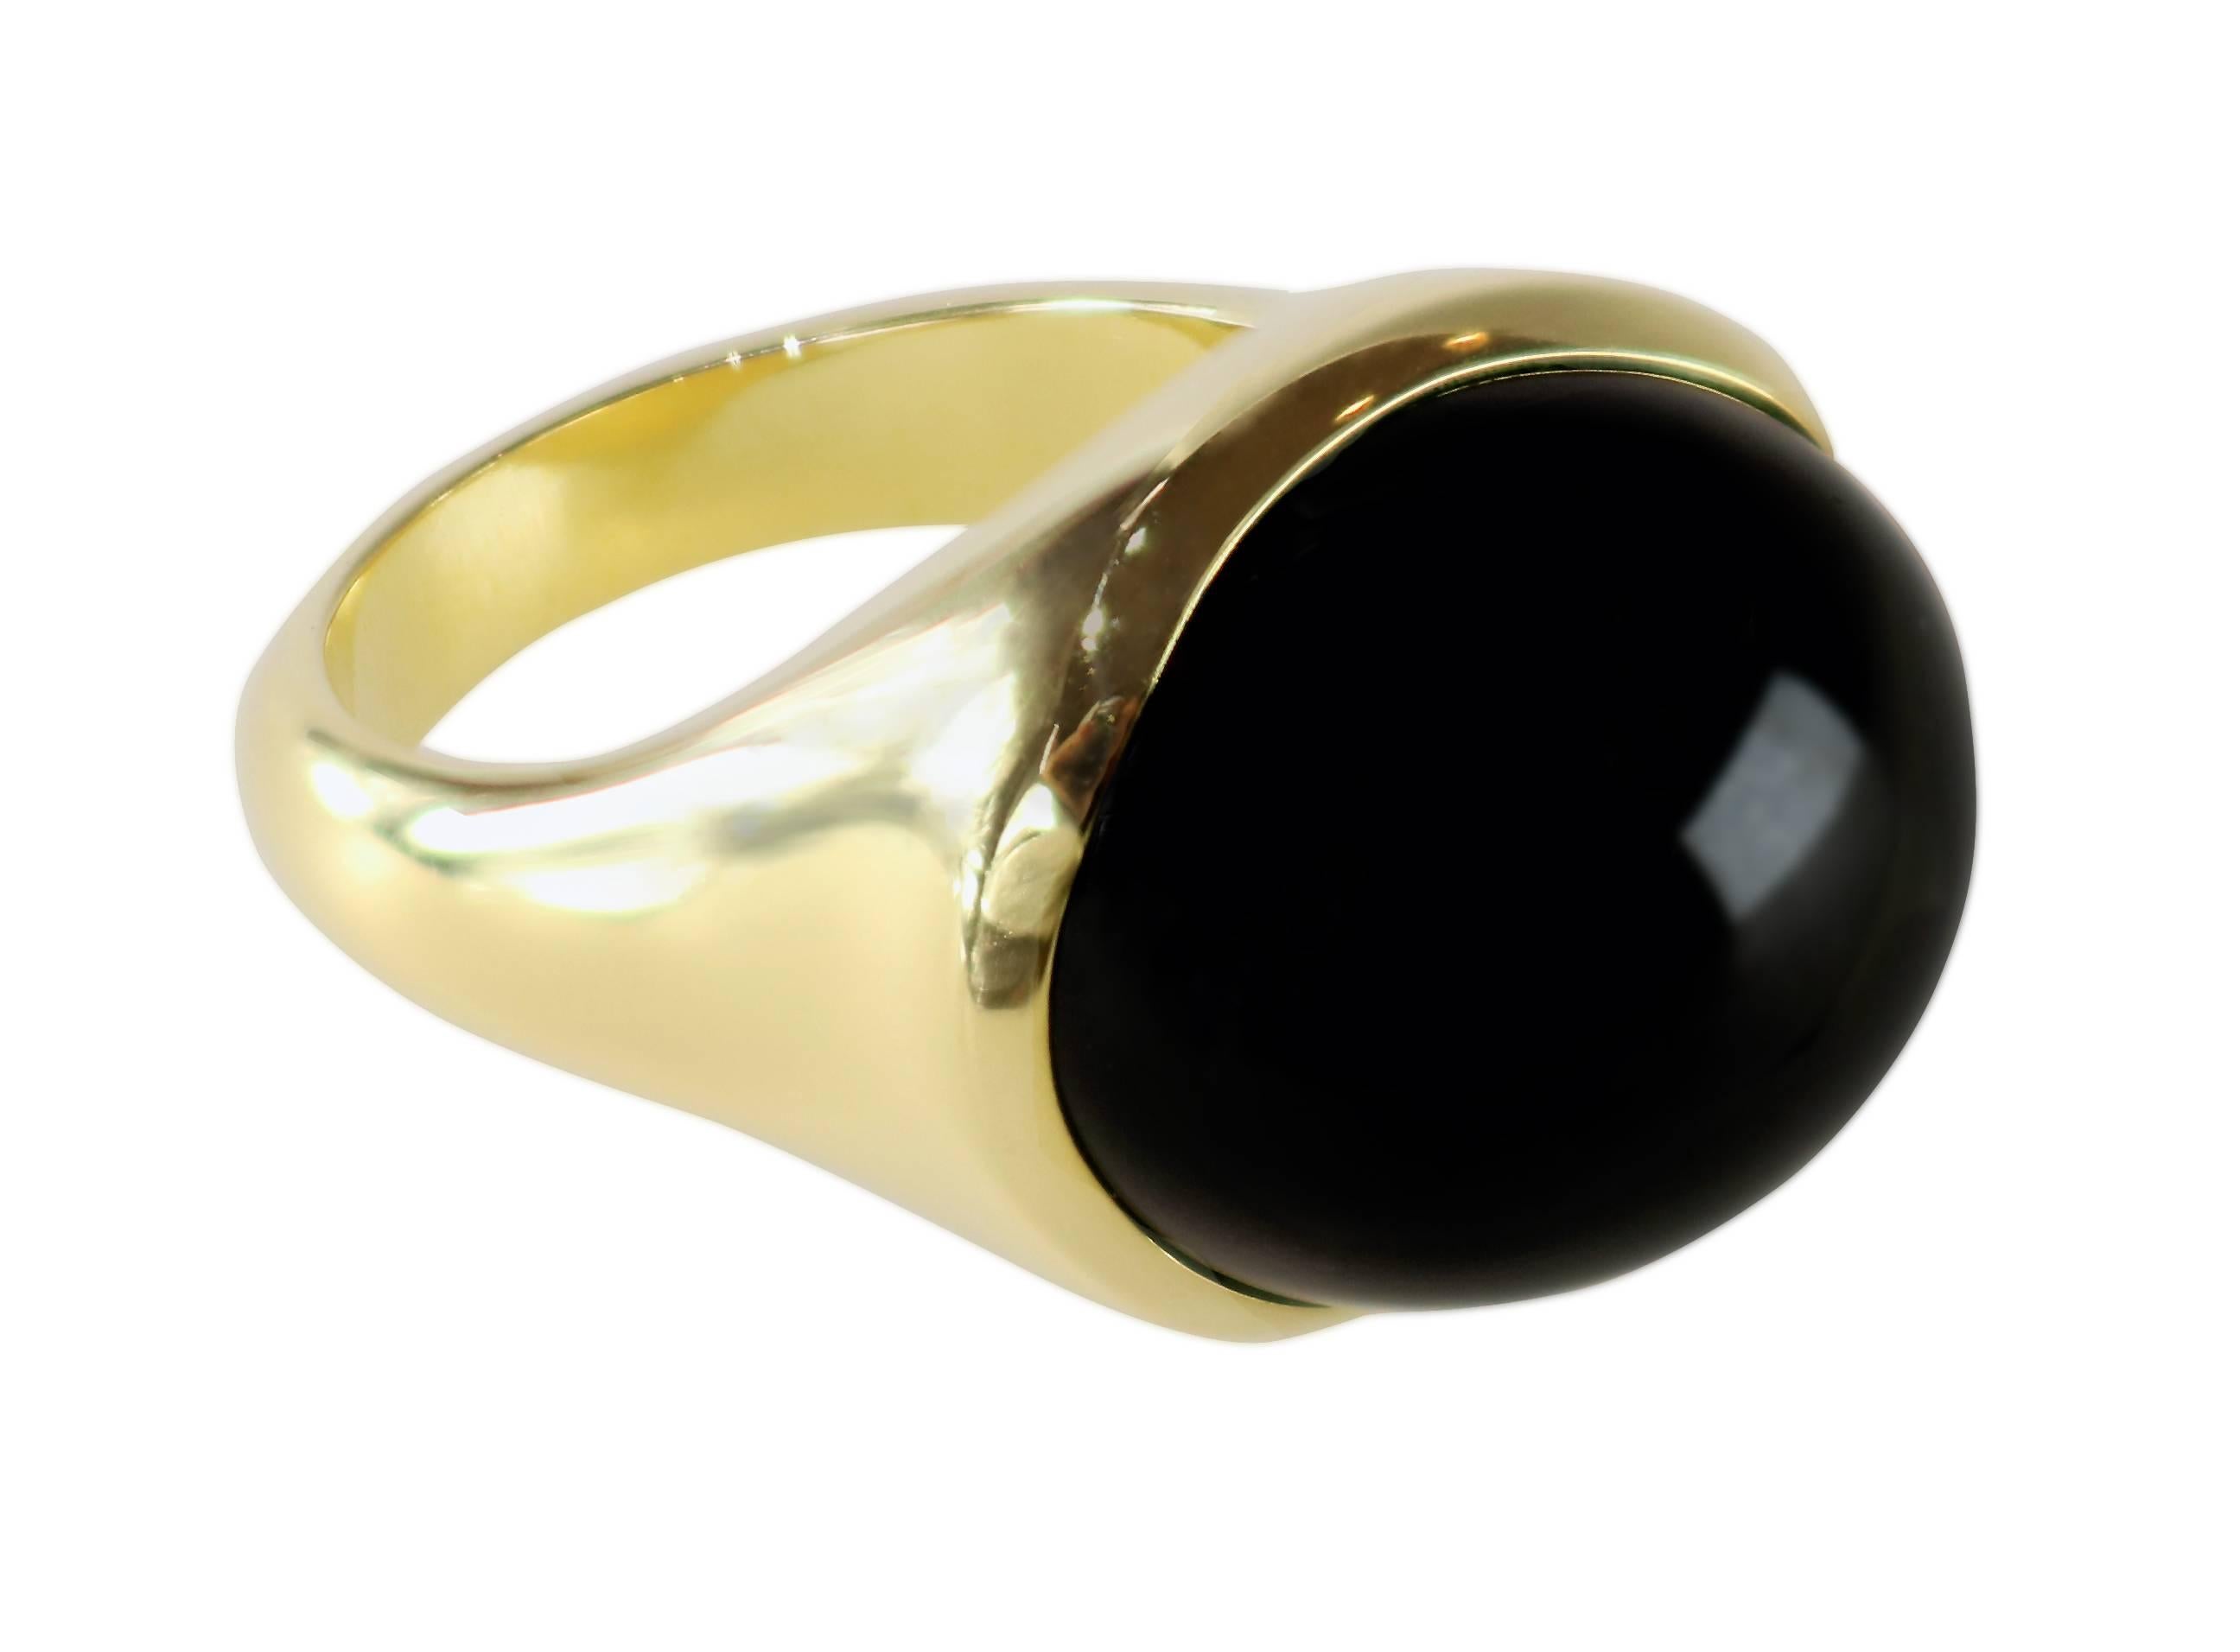 An 18K yellow gold ring set with cabochon black jade measuring 18mm x 20mm. It is 16mm high. The ring is size 7. Stamped Tiffany & Co., Elsa Peretti Hong Kong. With Tiffany pouch.